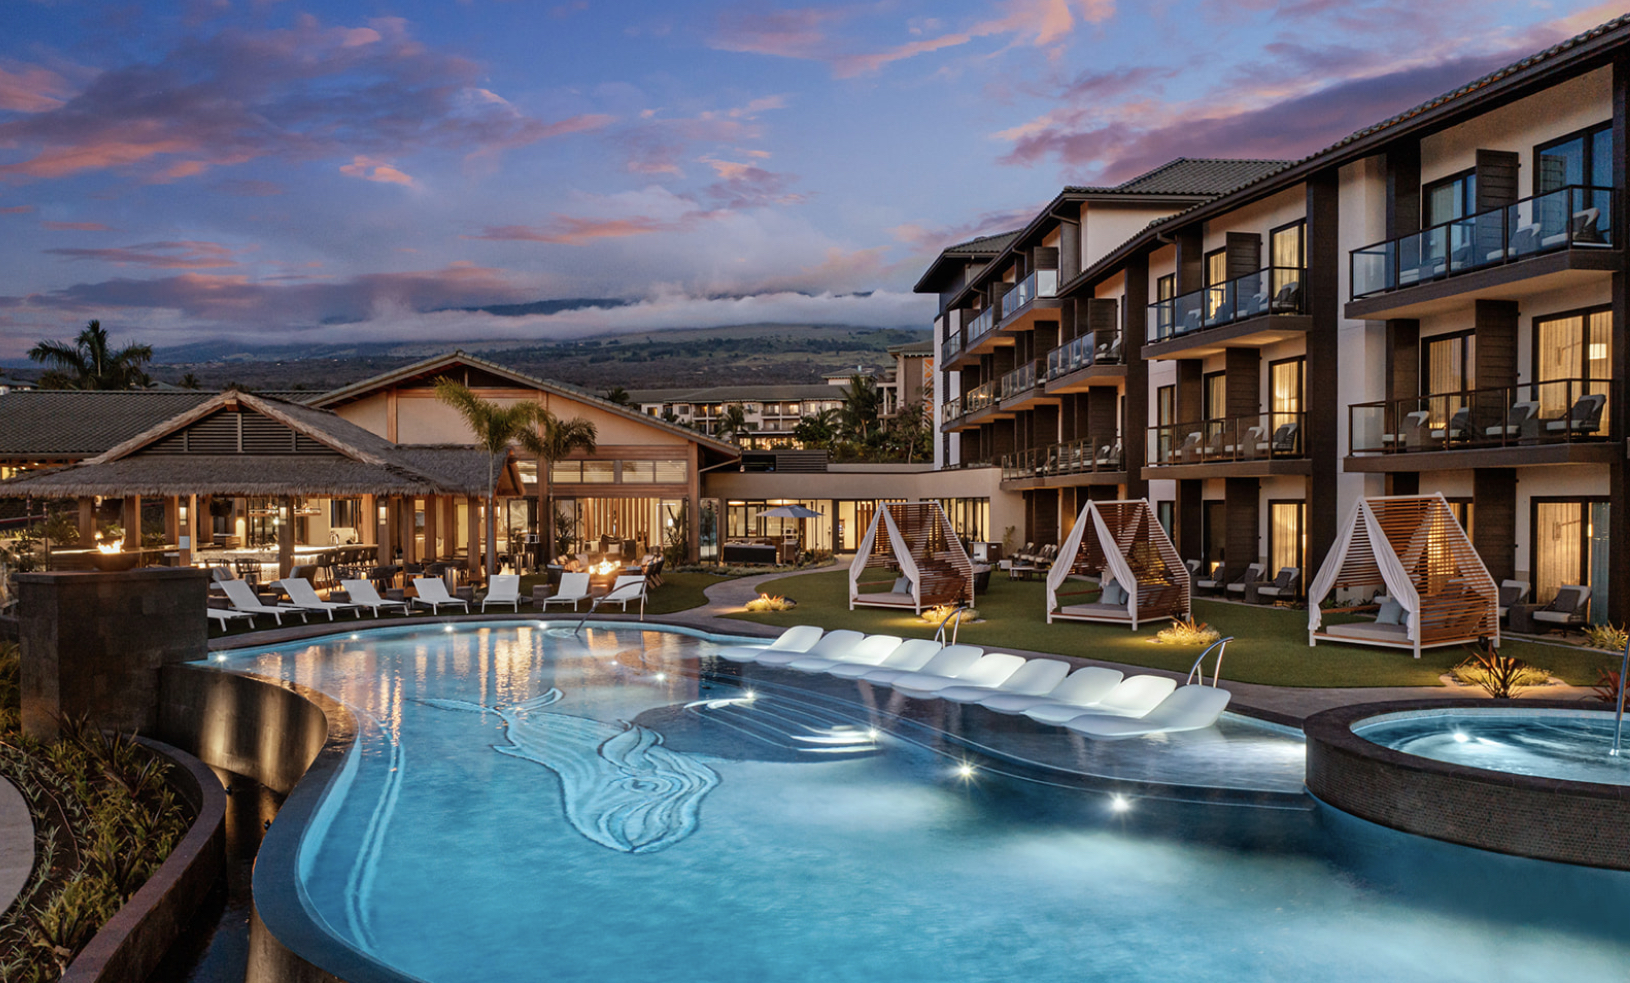 The AC Hotel by Marriott Maui Wailea has opened as the brands first property in the Hawaiian Islands